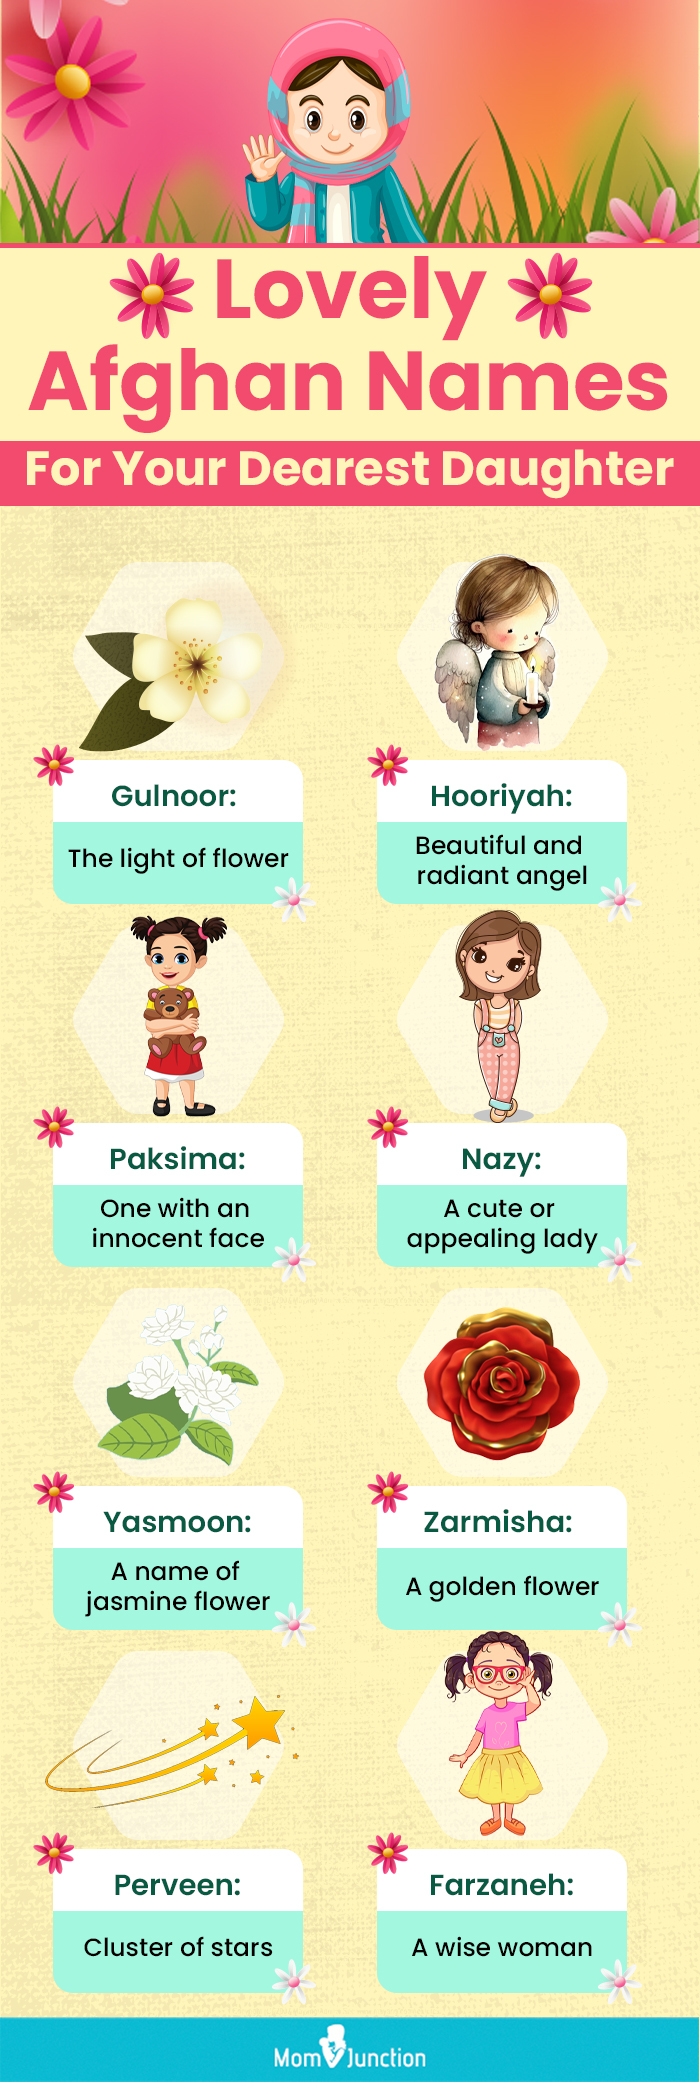 lovely afghan names for your dearest daughter (infographic)